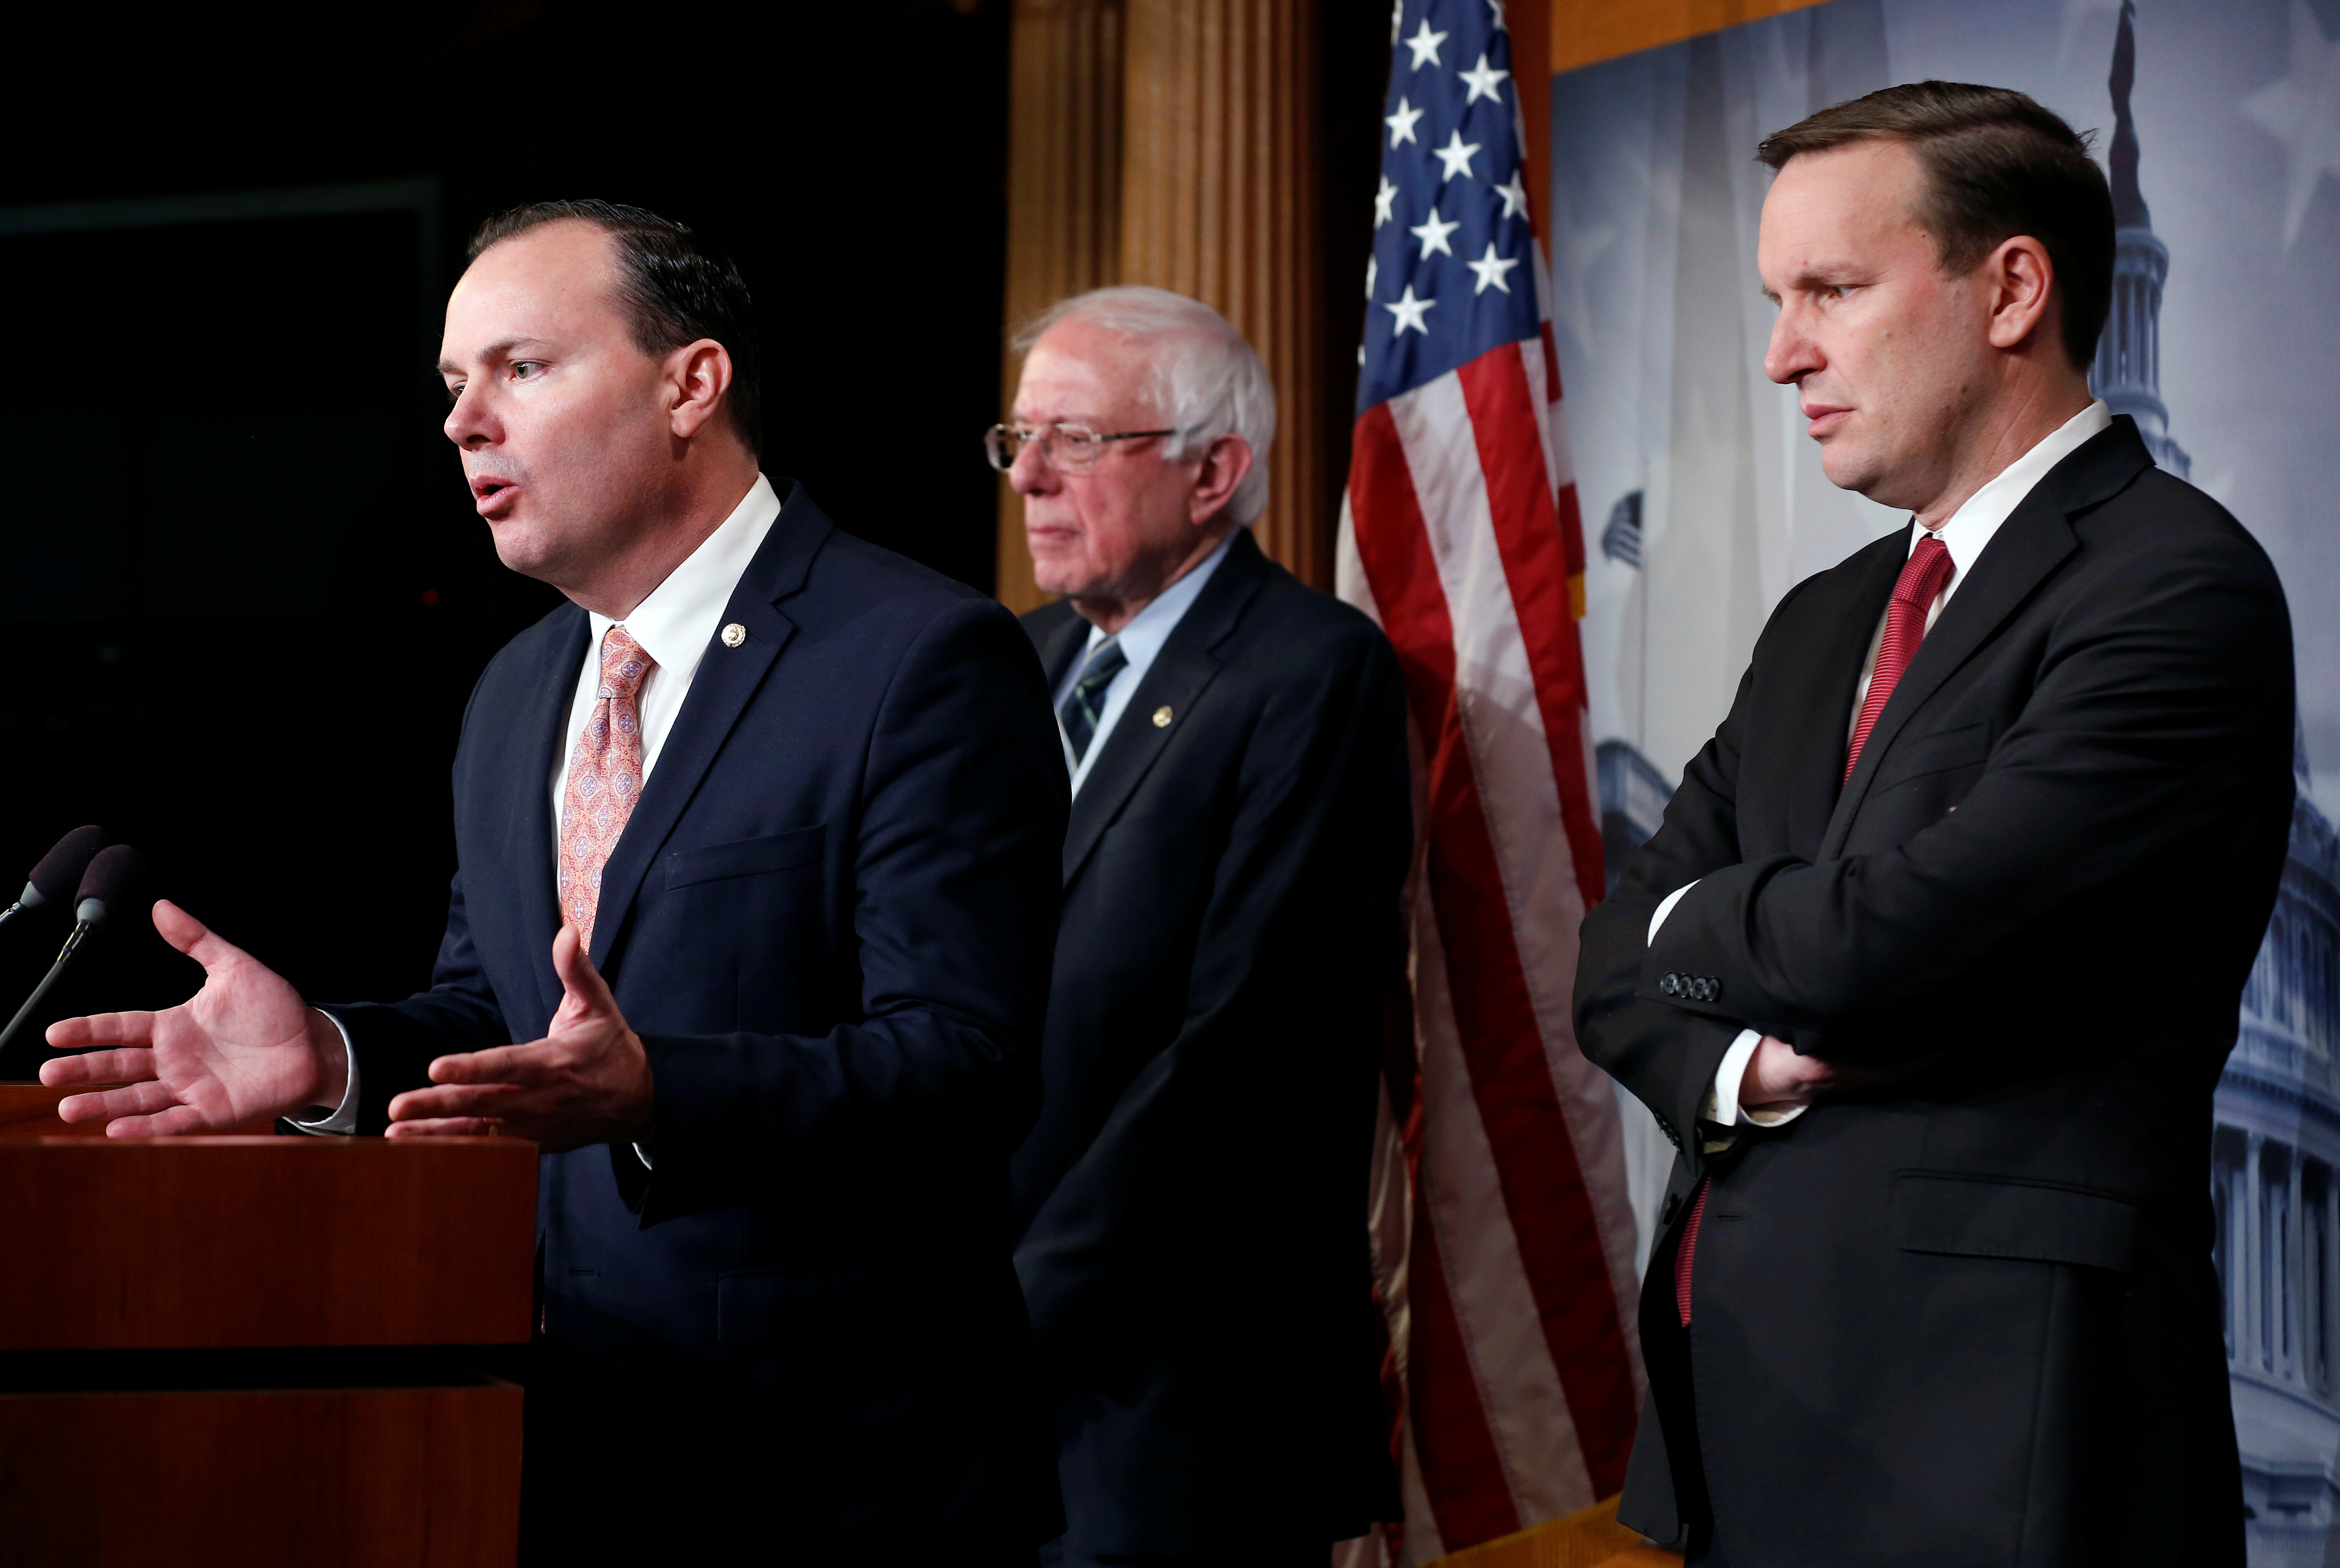 Senators Mike Lee (R-UT), Bernie Sanders (I-VT) and Chris Murphy (D-CT) speak after the senate voted on a resolution ending U.S. military support for the war in Yemen on Capitol Hill in Washington